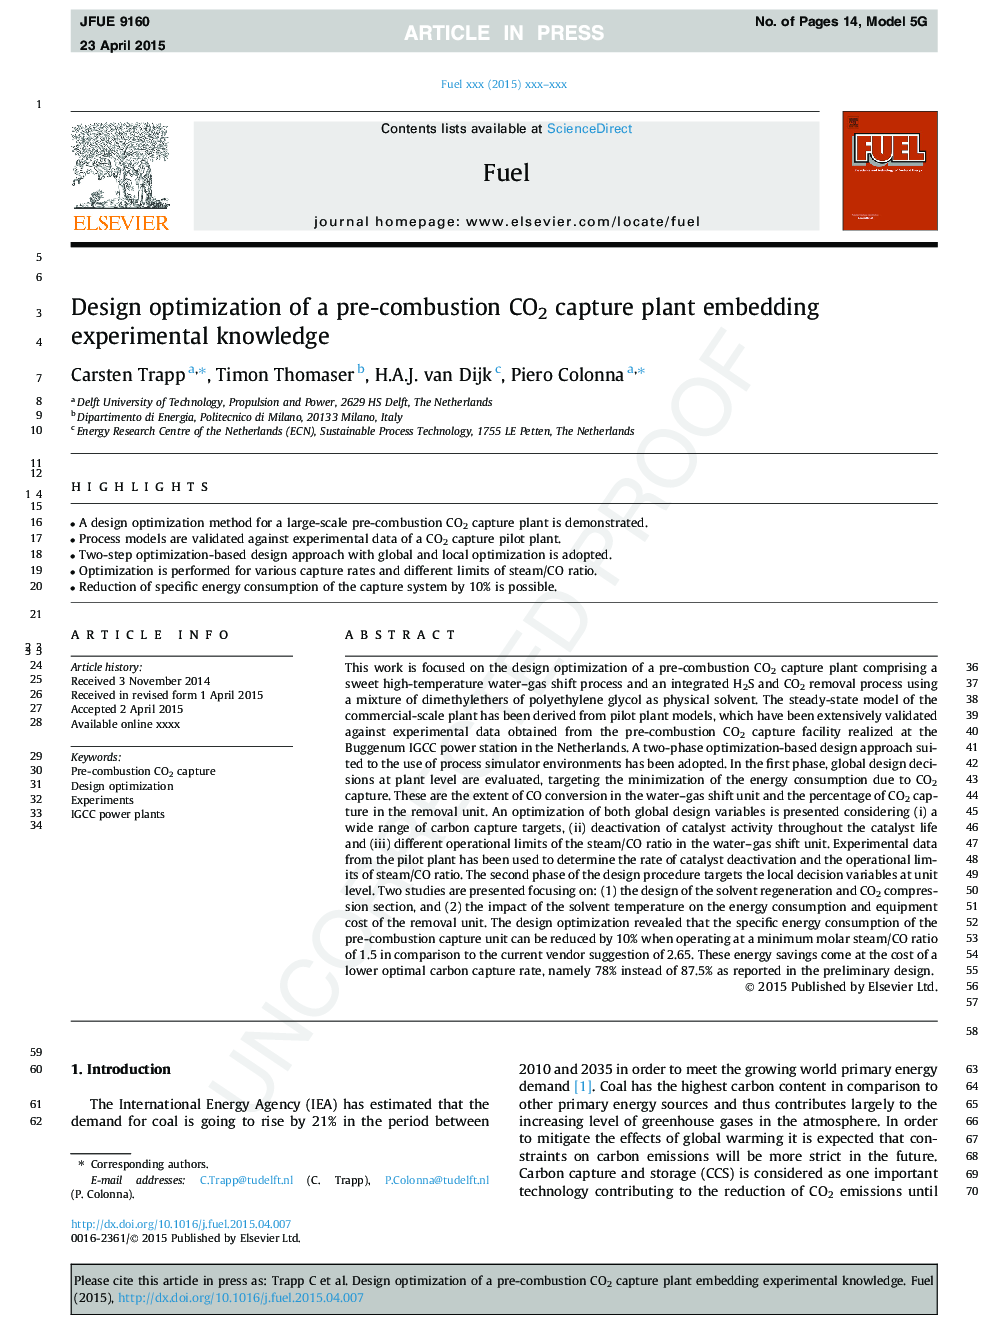 Design optimization of a pre-combustion CO2 capture plant embedding experimental knowledge